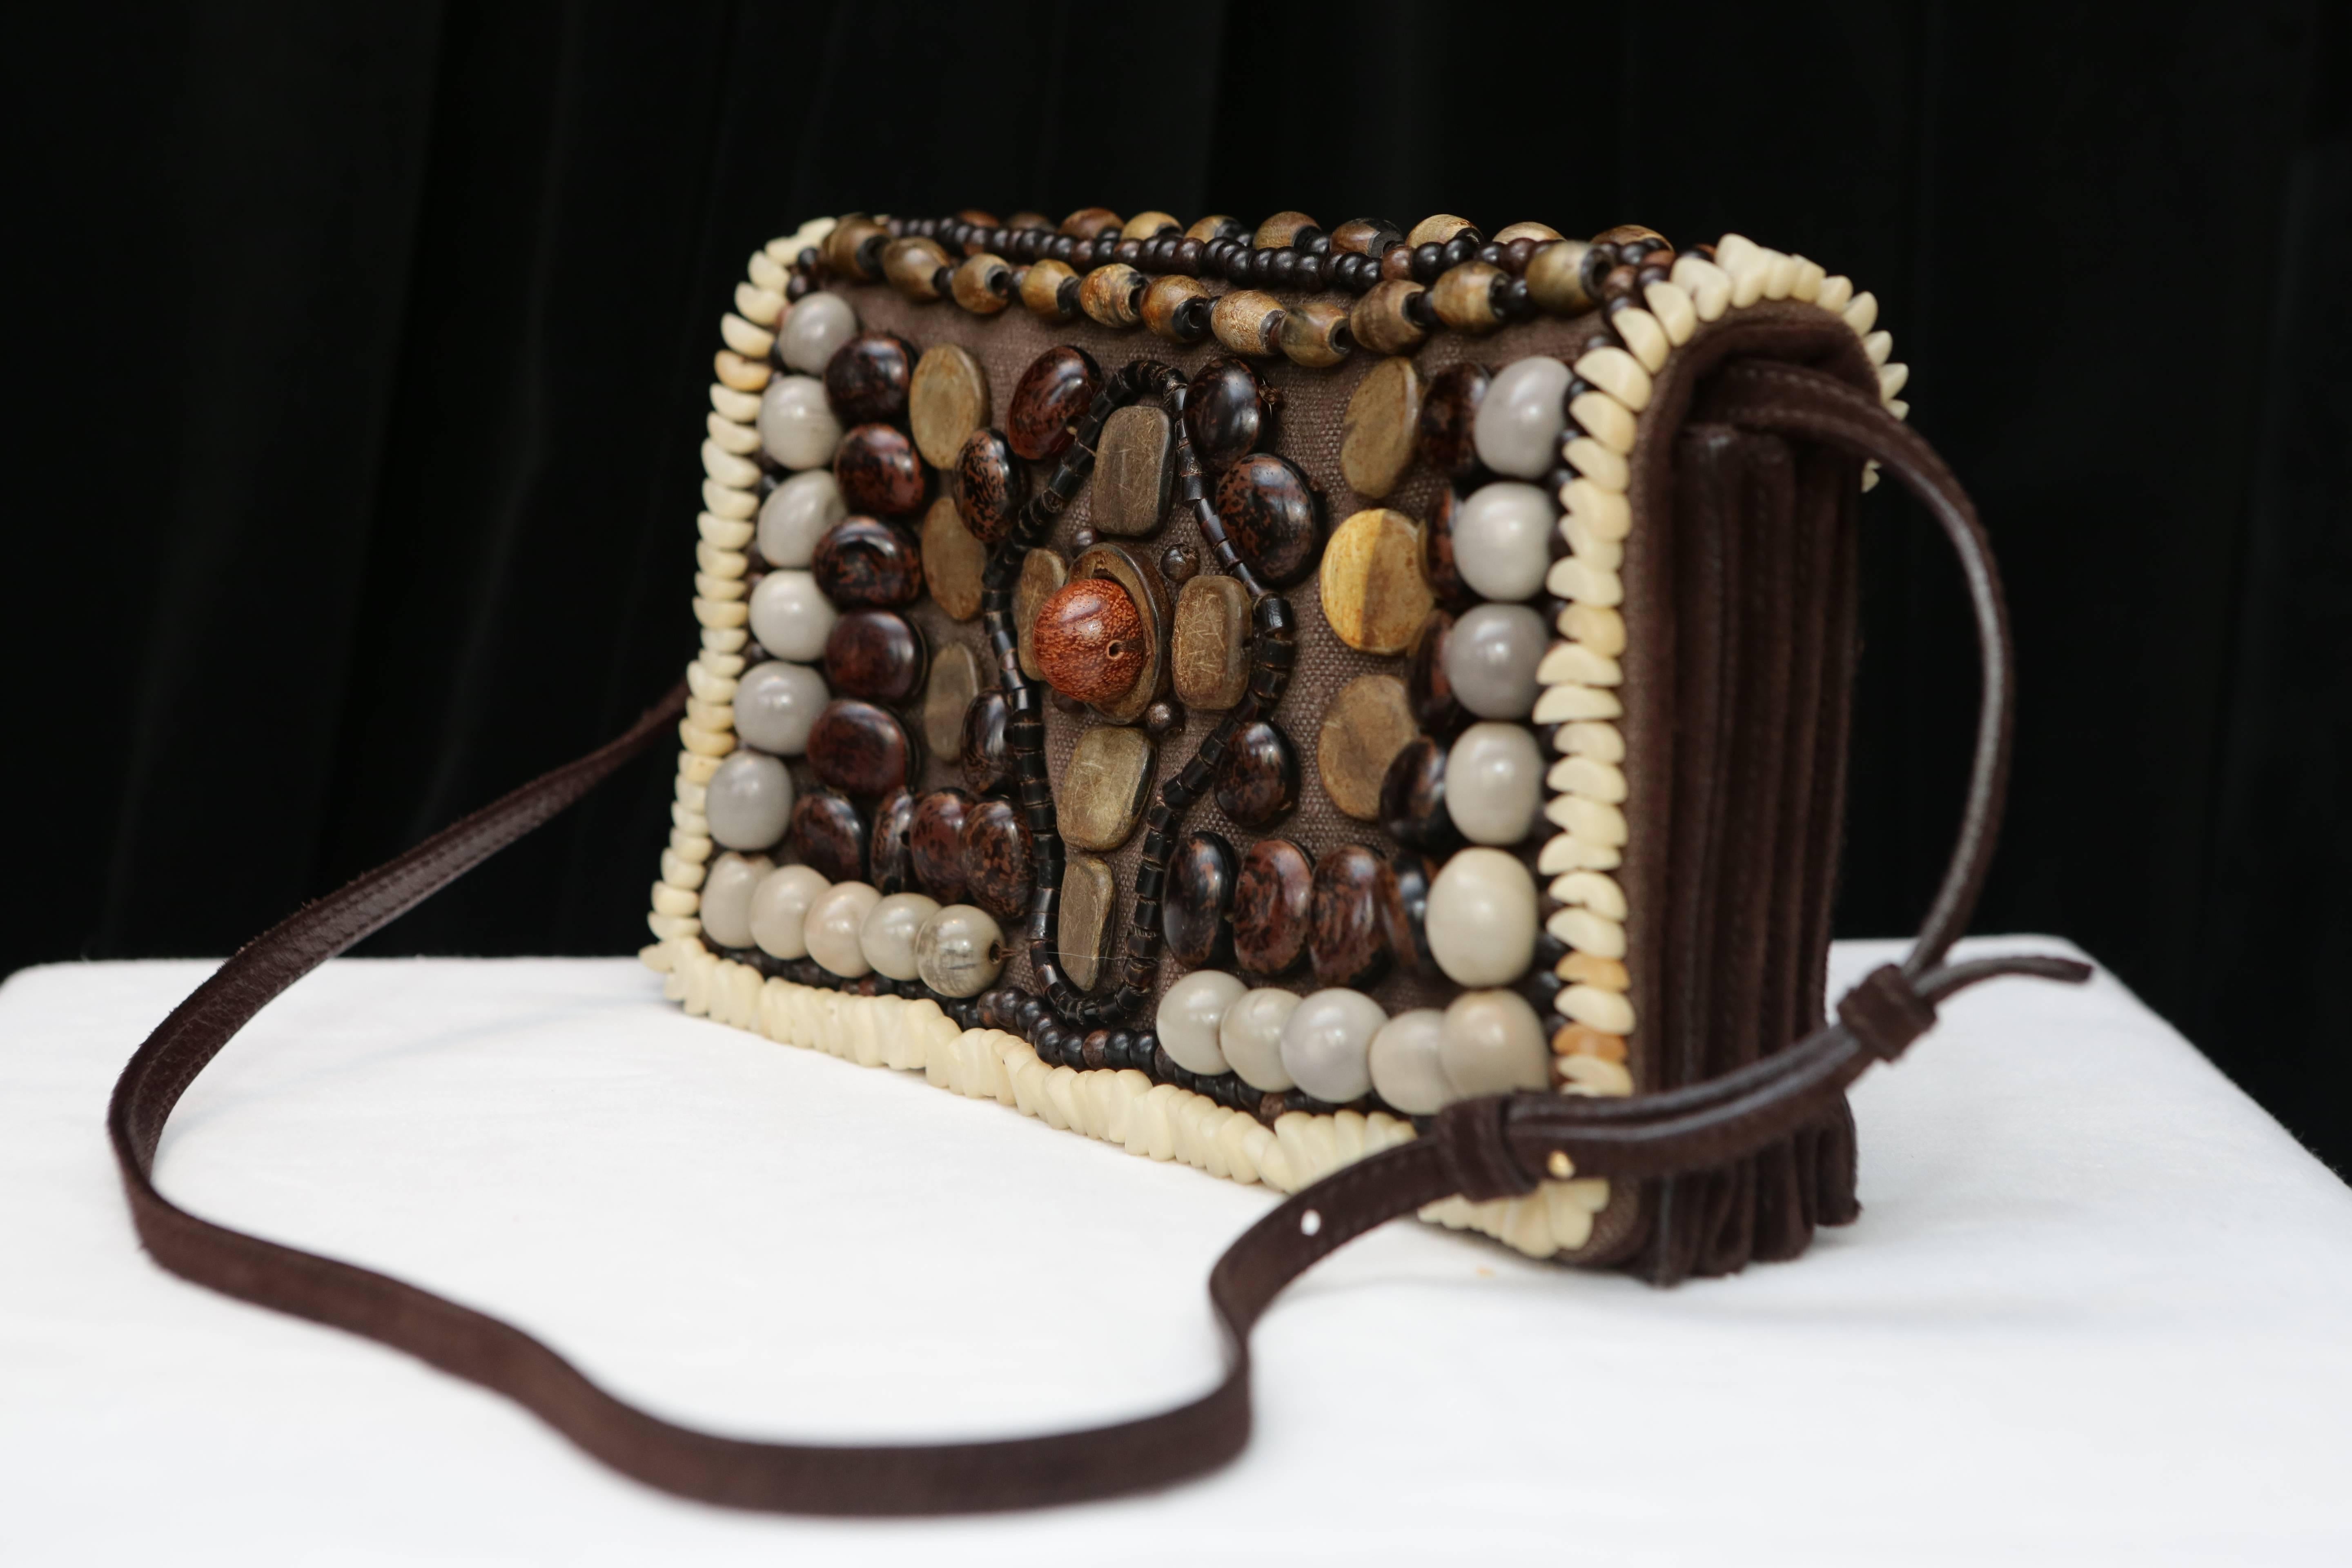 YVES SAINT LAURENT RIVE GAUCHE- Rectangular gusseted bag in brown suede closed by a flap entirely embroidered with stones and wooden beads in a gradation of gray and brown figuring a pattern of a cross.

It has a long brown suede handle for a